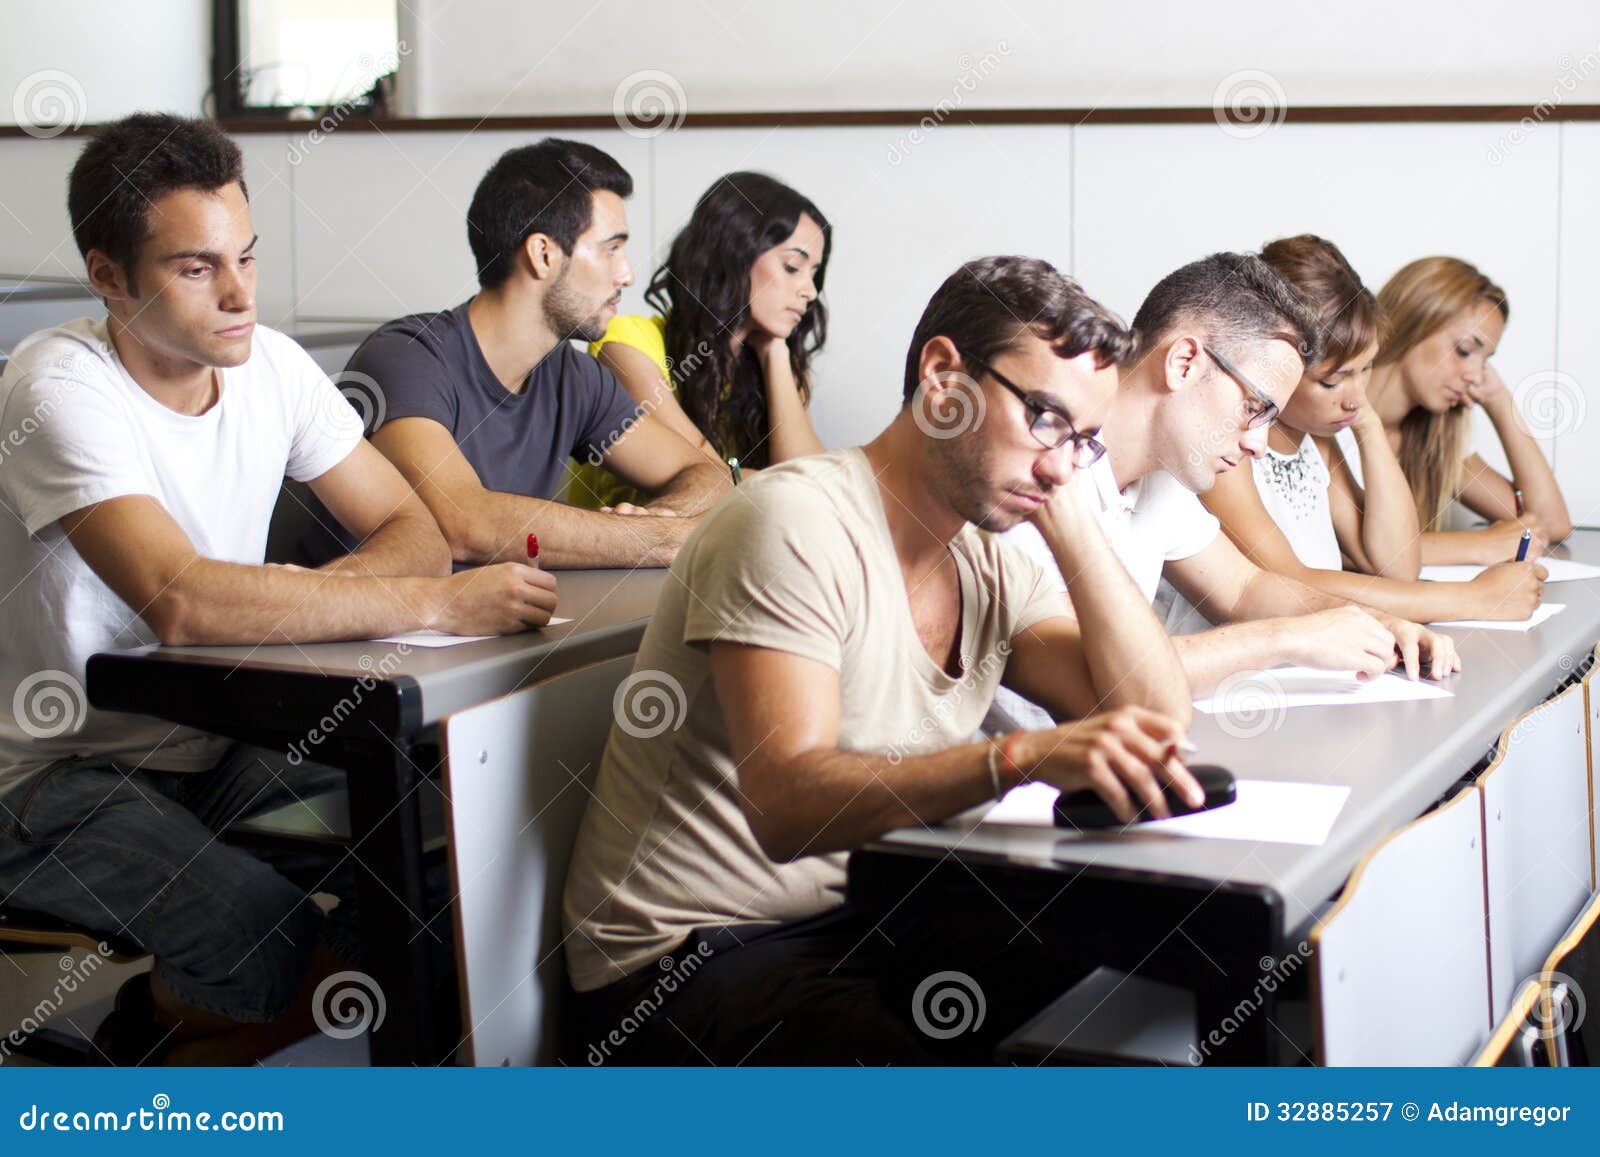 students studying in class